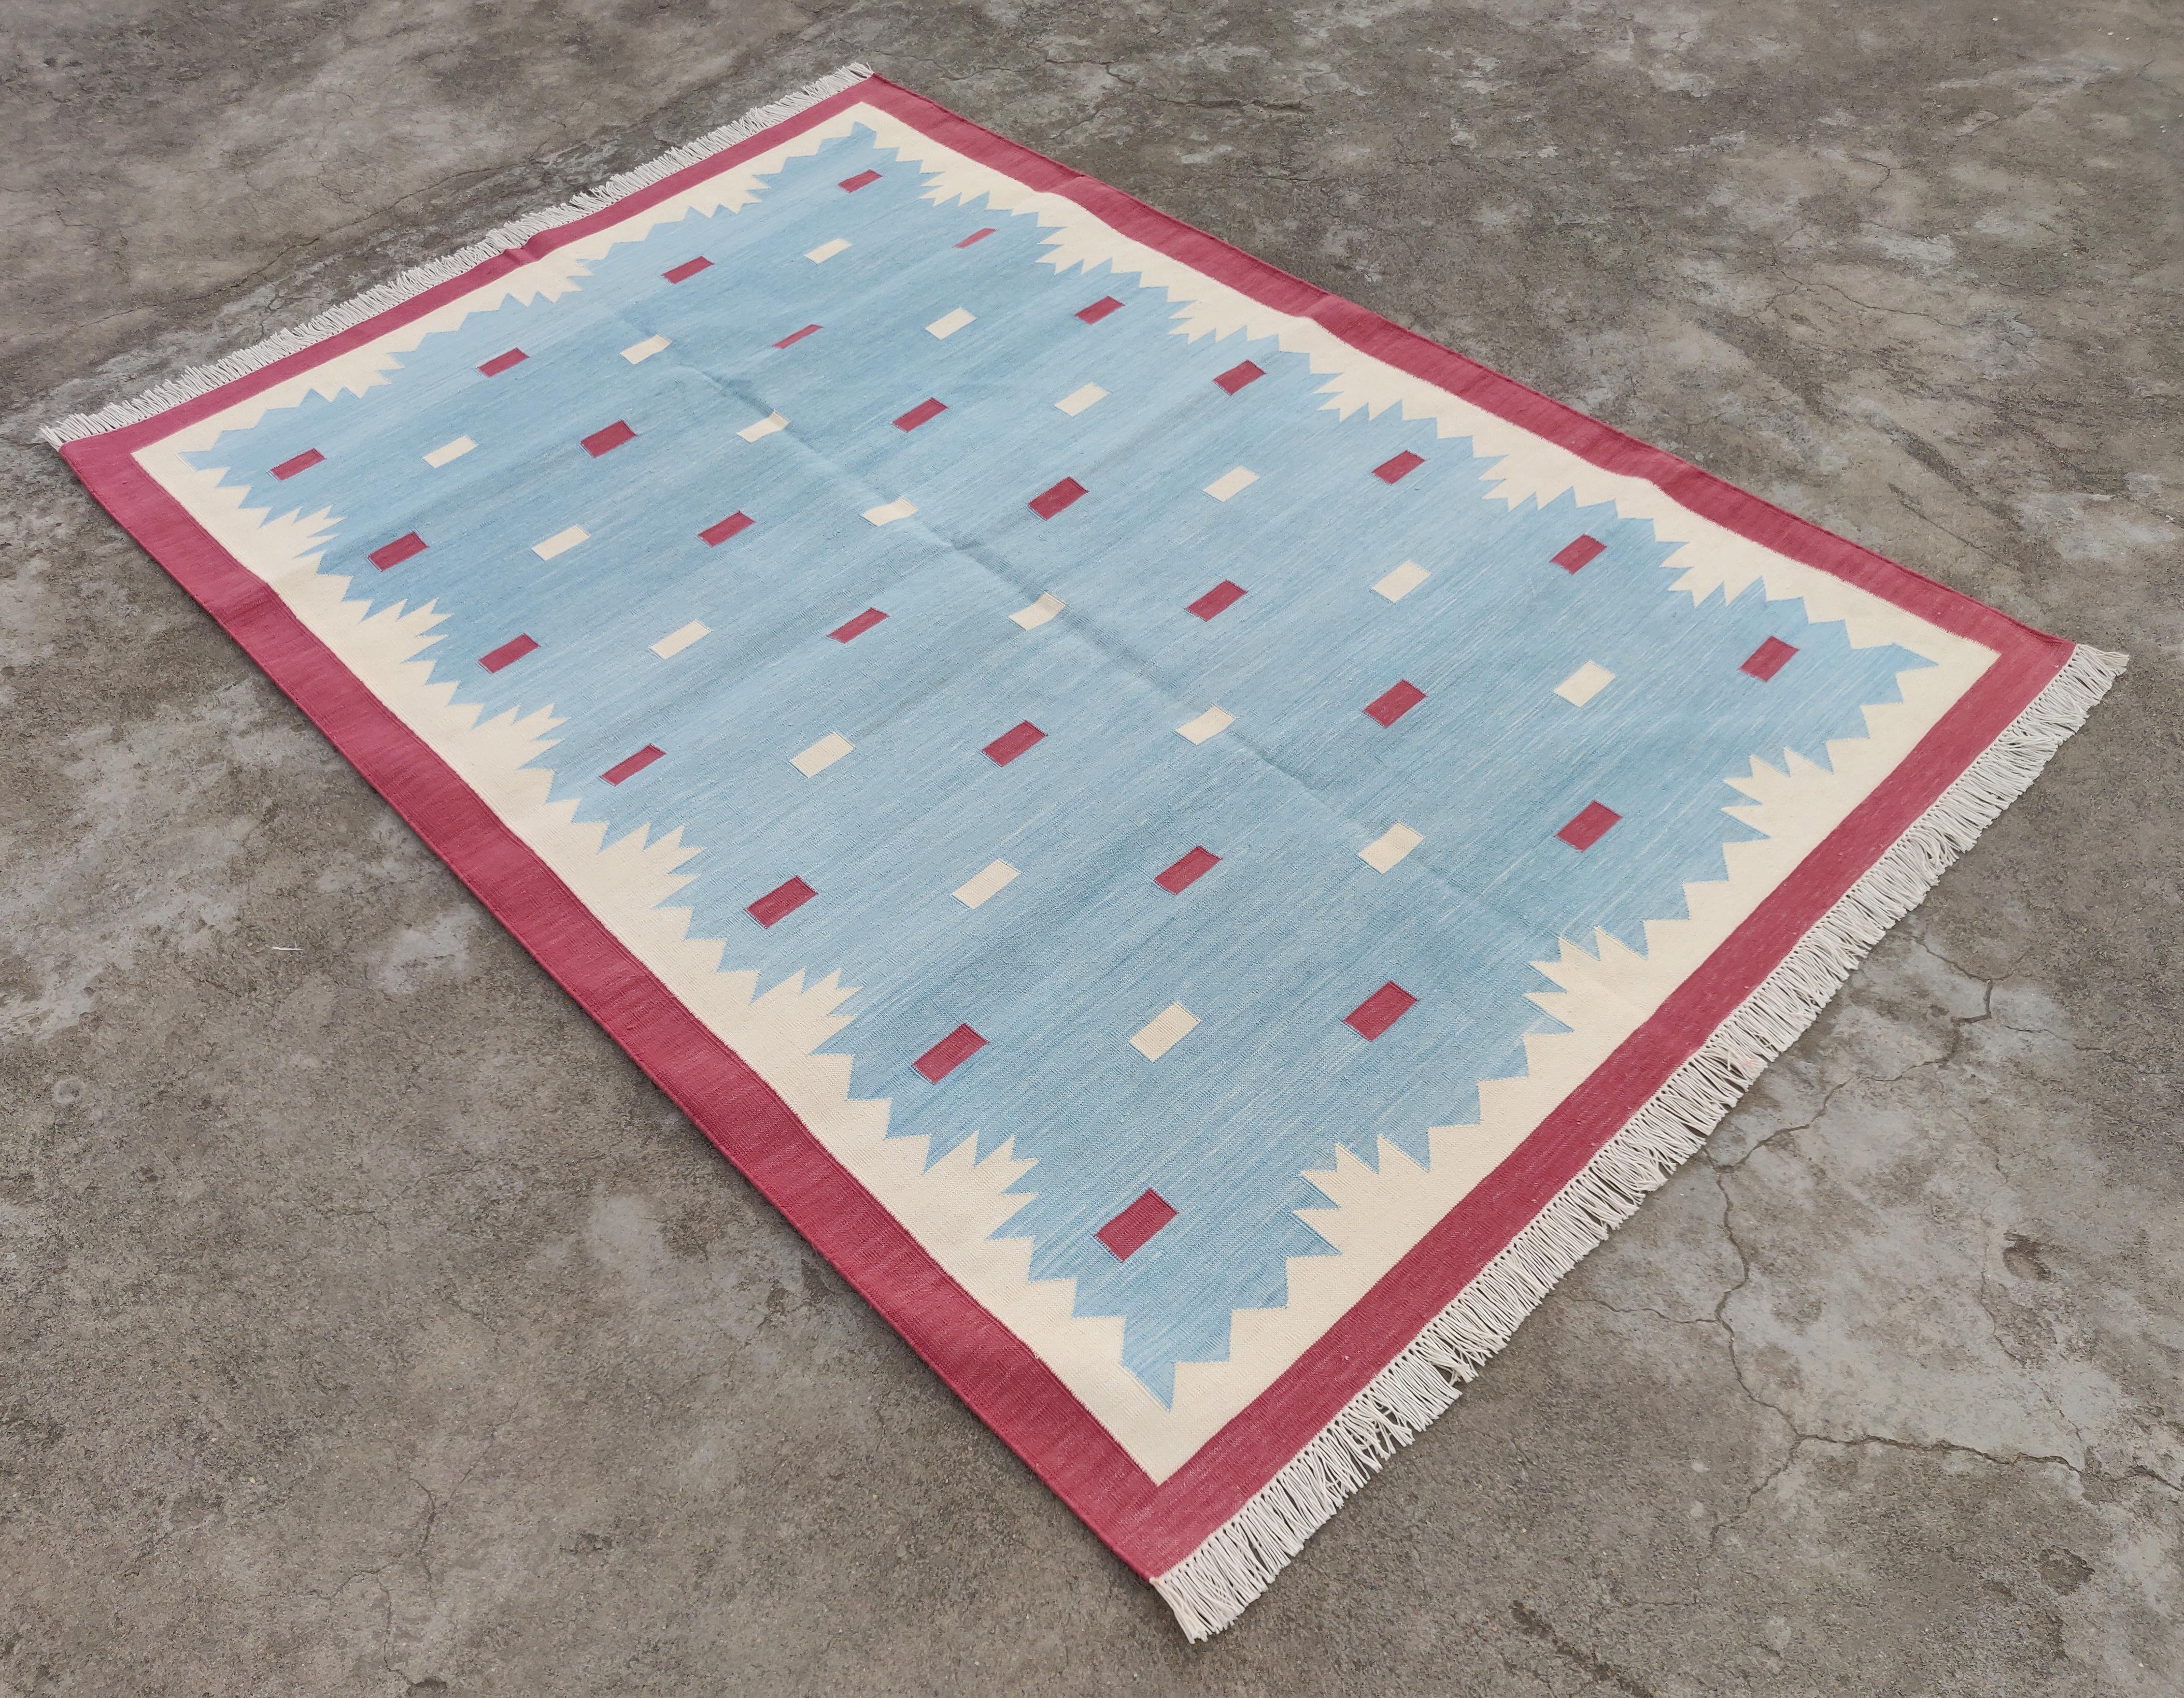 Cotton Vegetable Dyed Sky Blue, Cream And Raspberry Pink Geometric Indian Dhurrie Rug-4'x6' 
These special flat-weave dhurries are hand-woven with 15 ply 100% cotton yarn. Due to the special manufacturing techniques used to create our rugs, the size